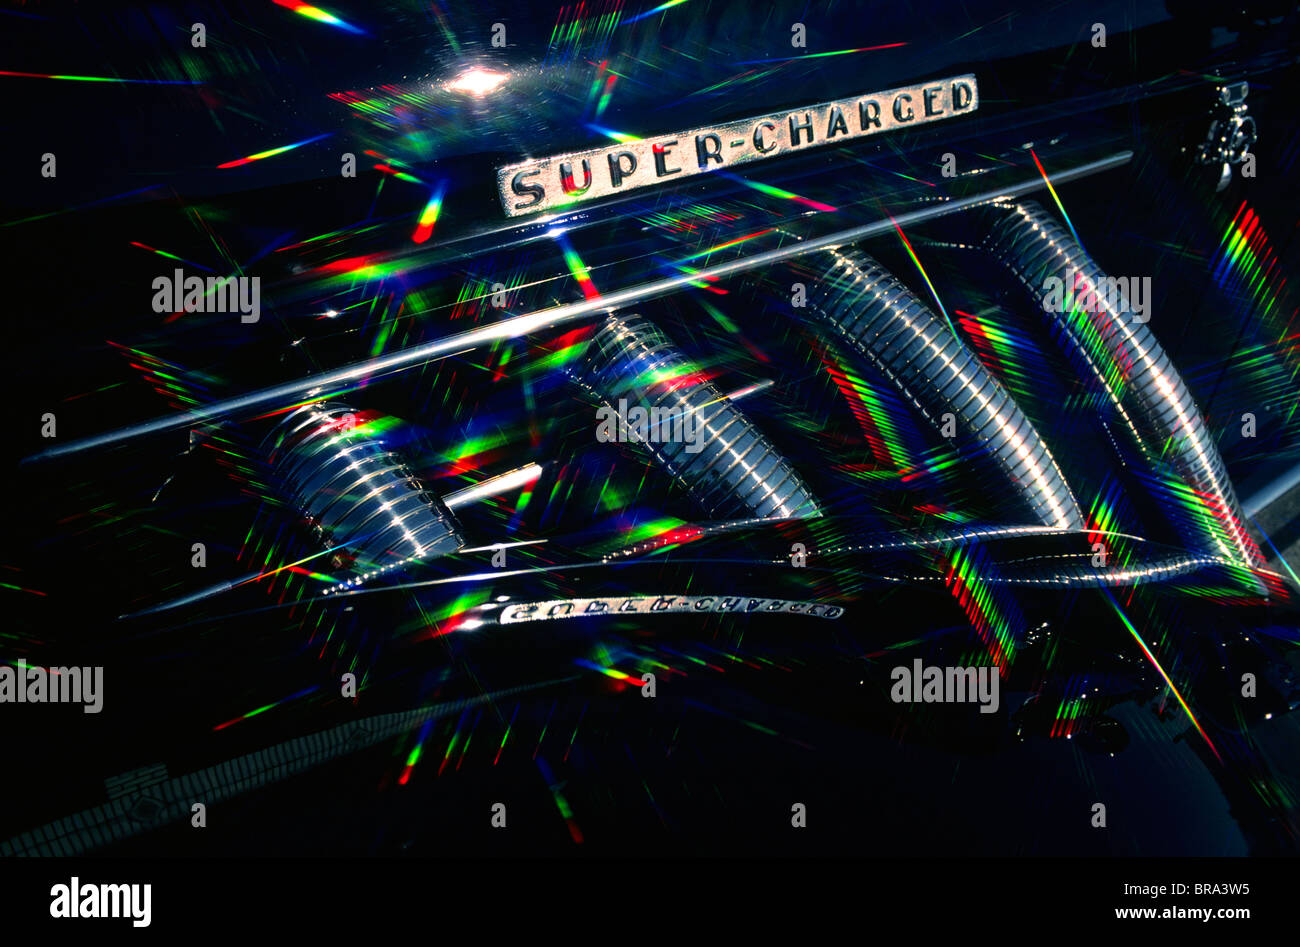 1930s 1930 RETRO SUPER CHARGED MANIFOLD PRISMATIC GRAPHIC EFFECT REFRACTED LIGHT COLORFUL SPEED METALLIC Stock Photo